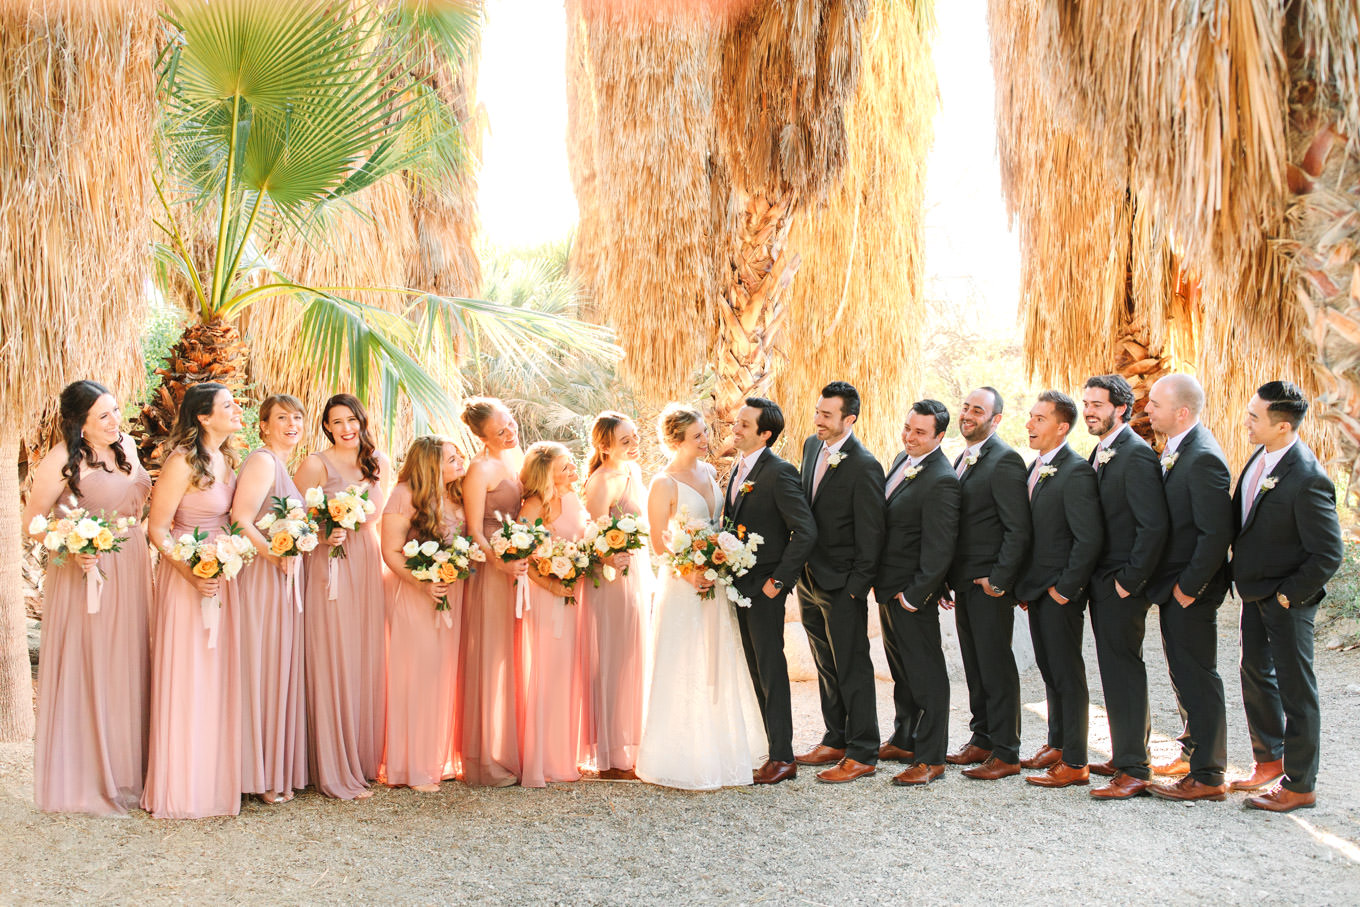 Wedding party in palm garden | Living Desert Zoo & Gardens wedding with unique details | Elevated and colorful wedding photography for fun-loving couples in Southern California |  #PalmSprings #palmspringsphotographer #gardenwedding #palmspringswedding  Source: Mary Costa Photography | Los Angeles wedding photographer 